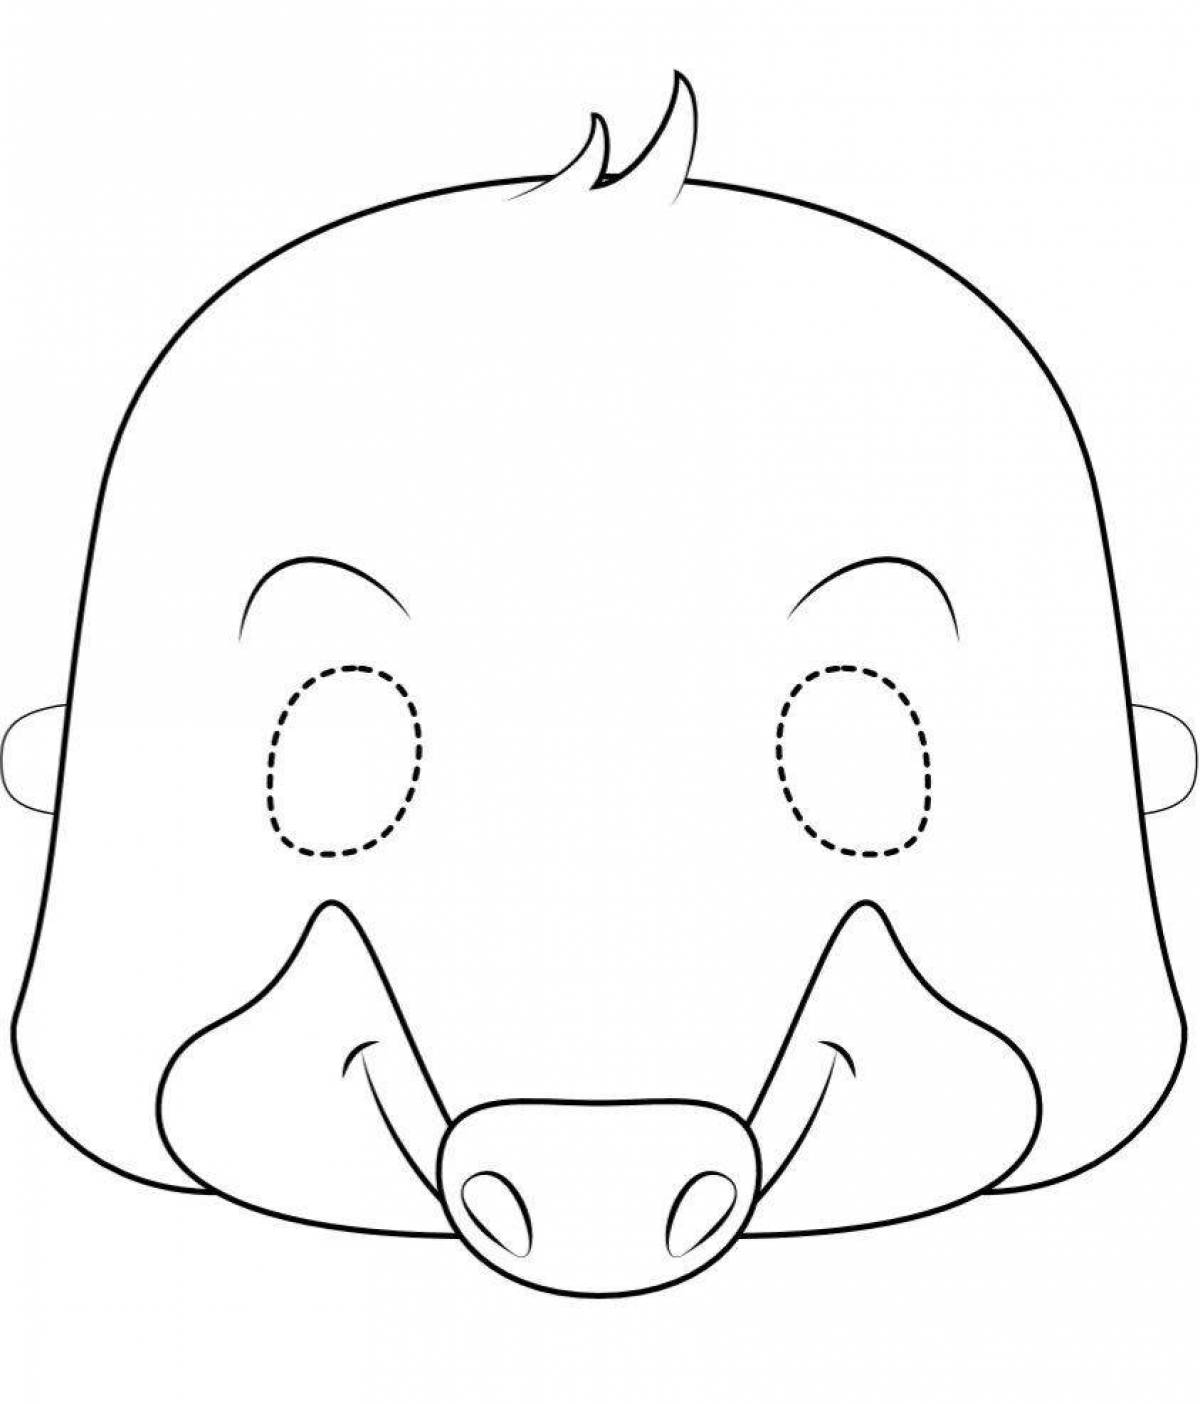 Coloring for kids colorful animal head mask